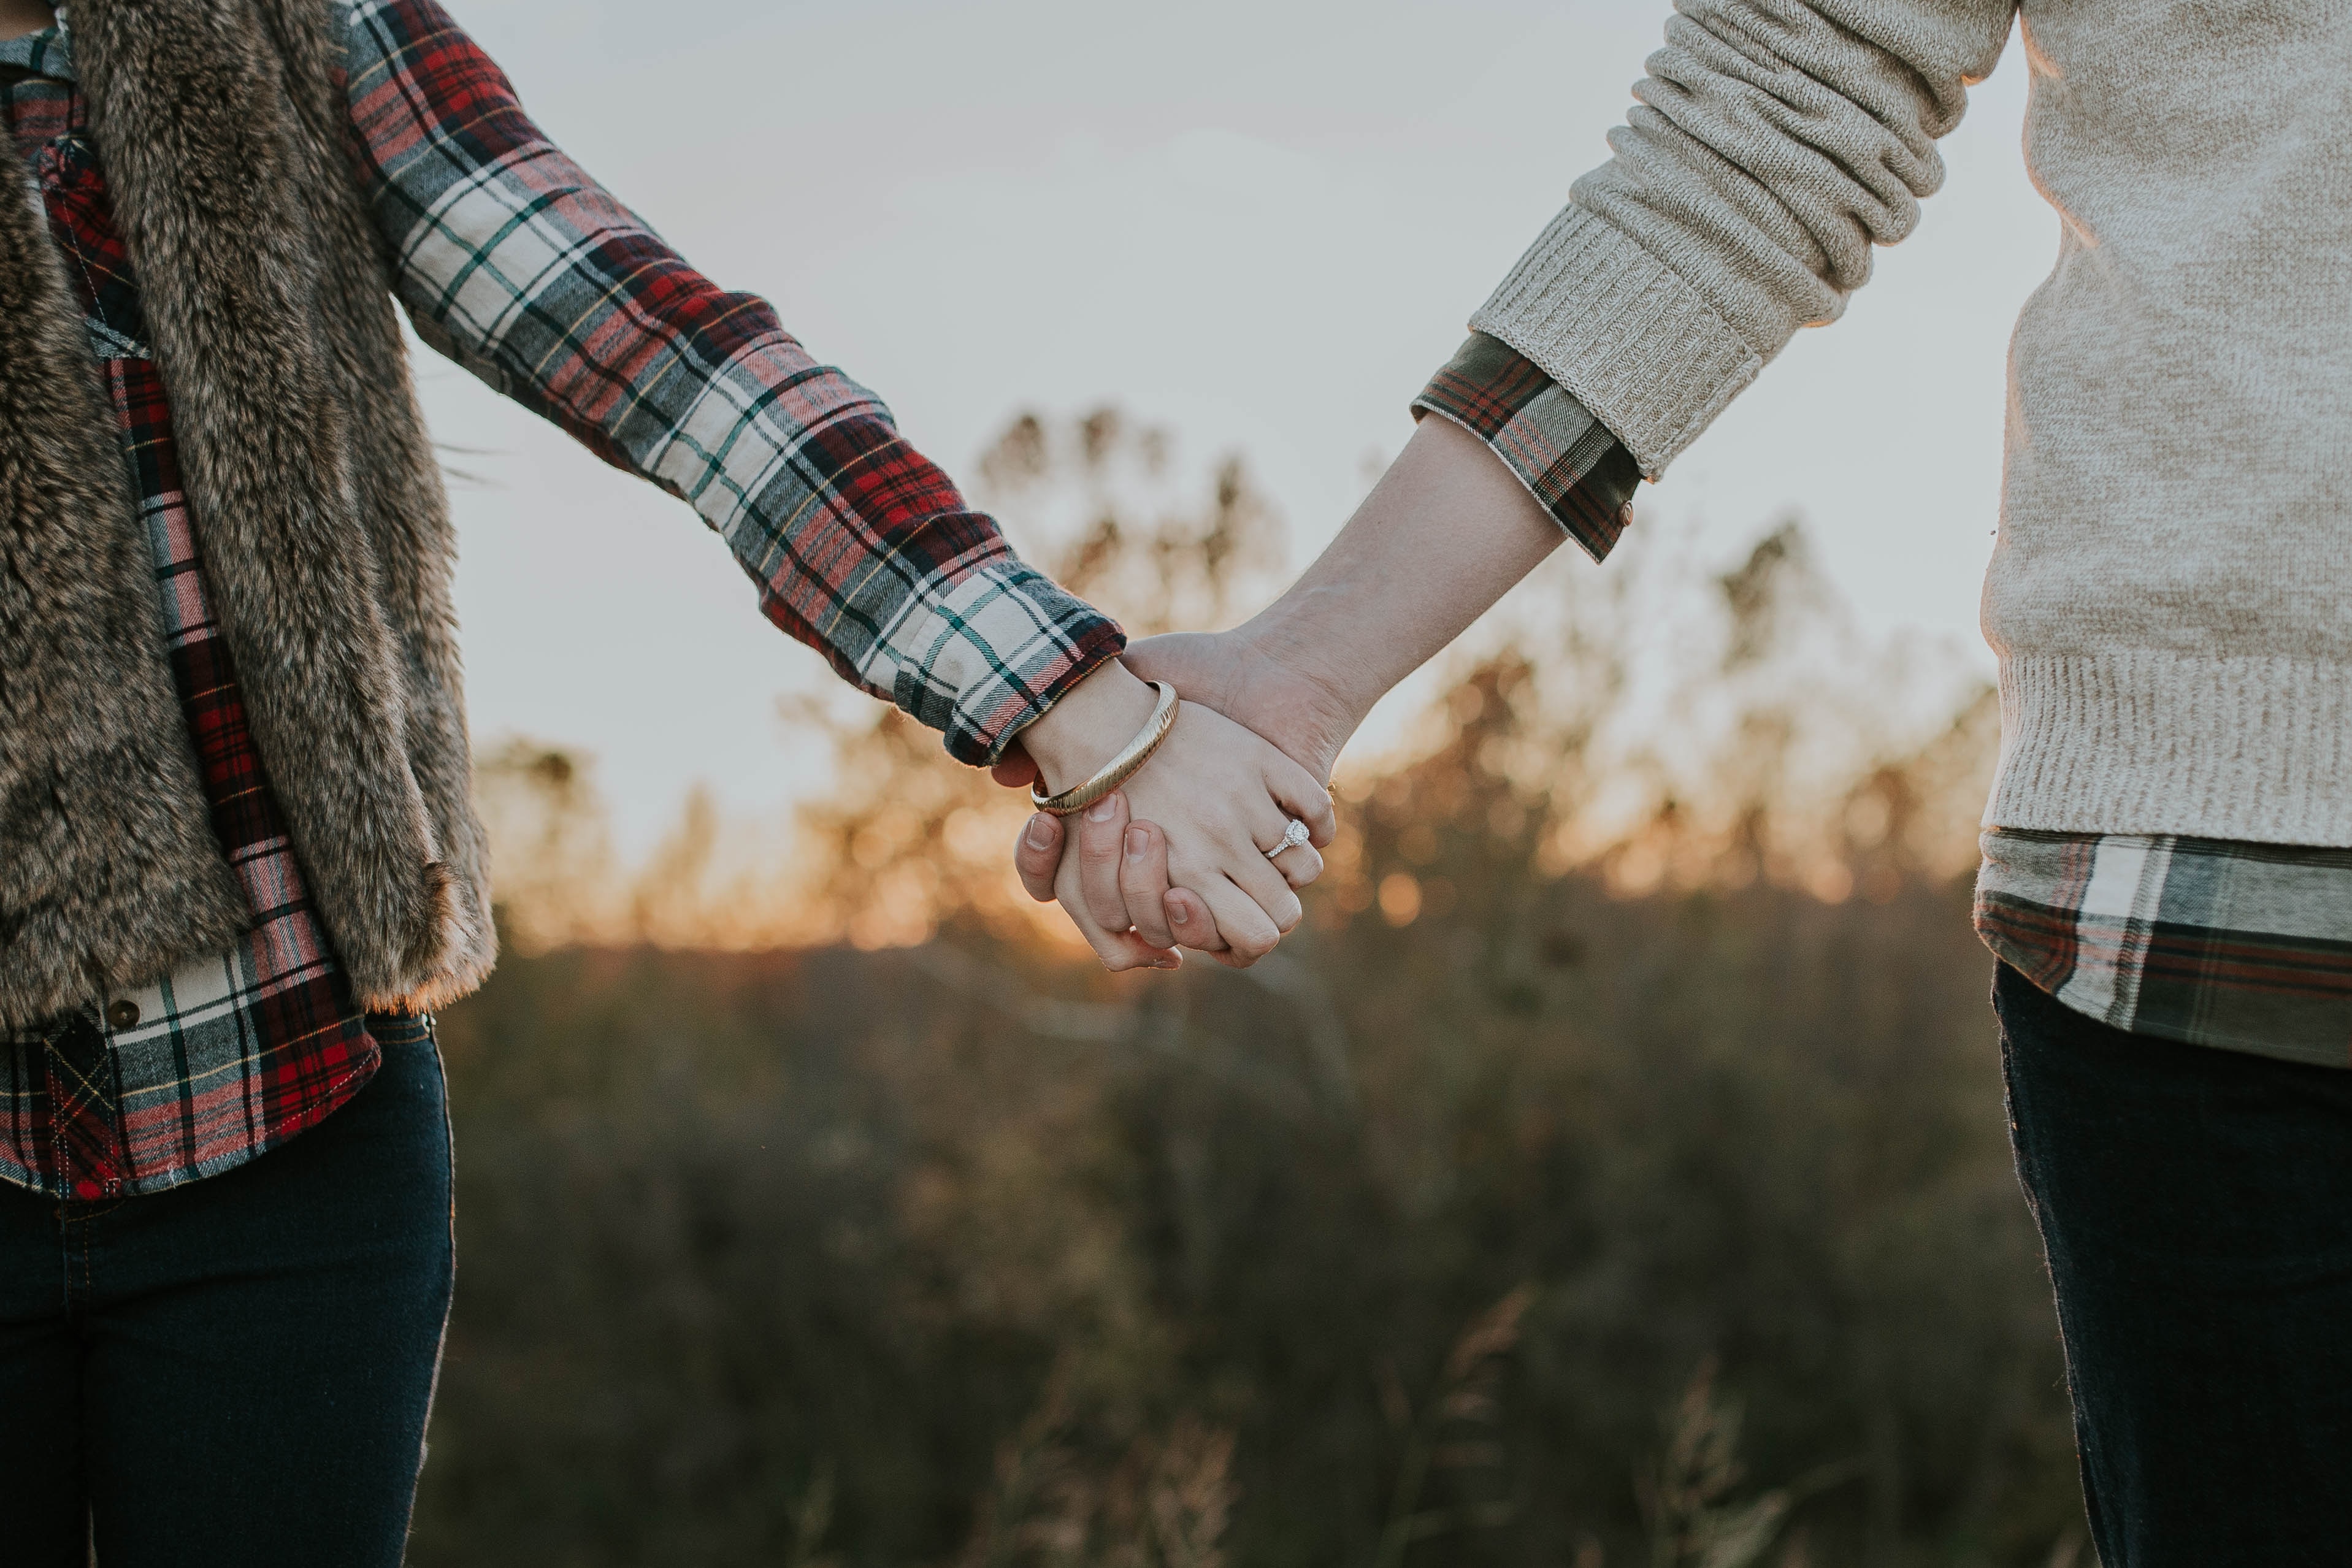 Young lovers holding hands | Source: Unsplash